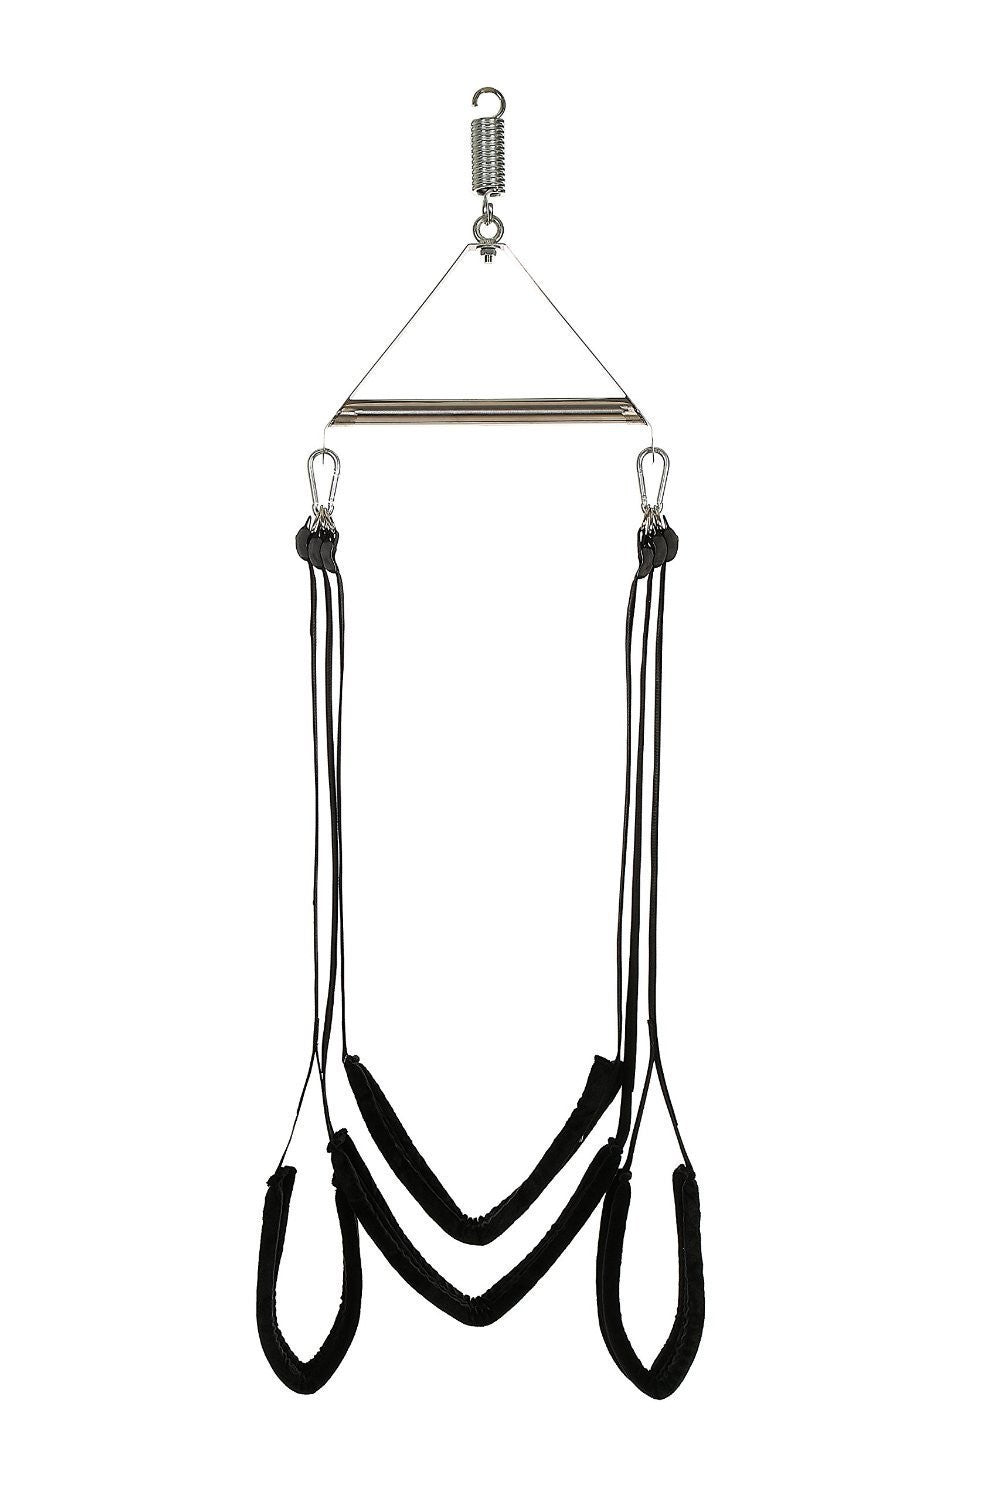 The Evolution of the Sex Swing - or as we like to call it, the Love Swing